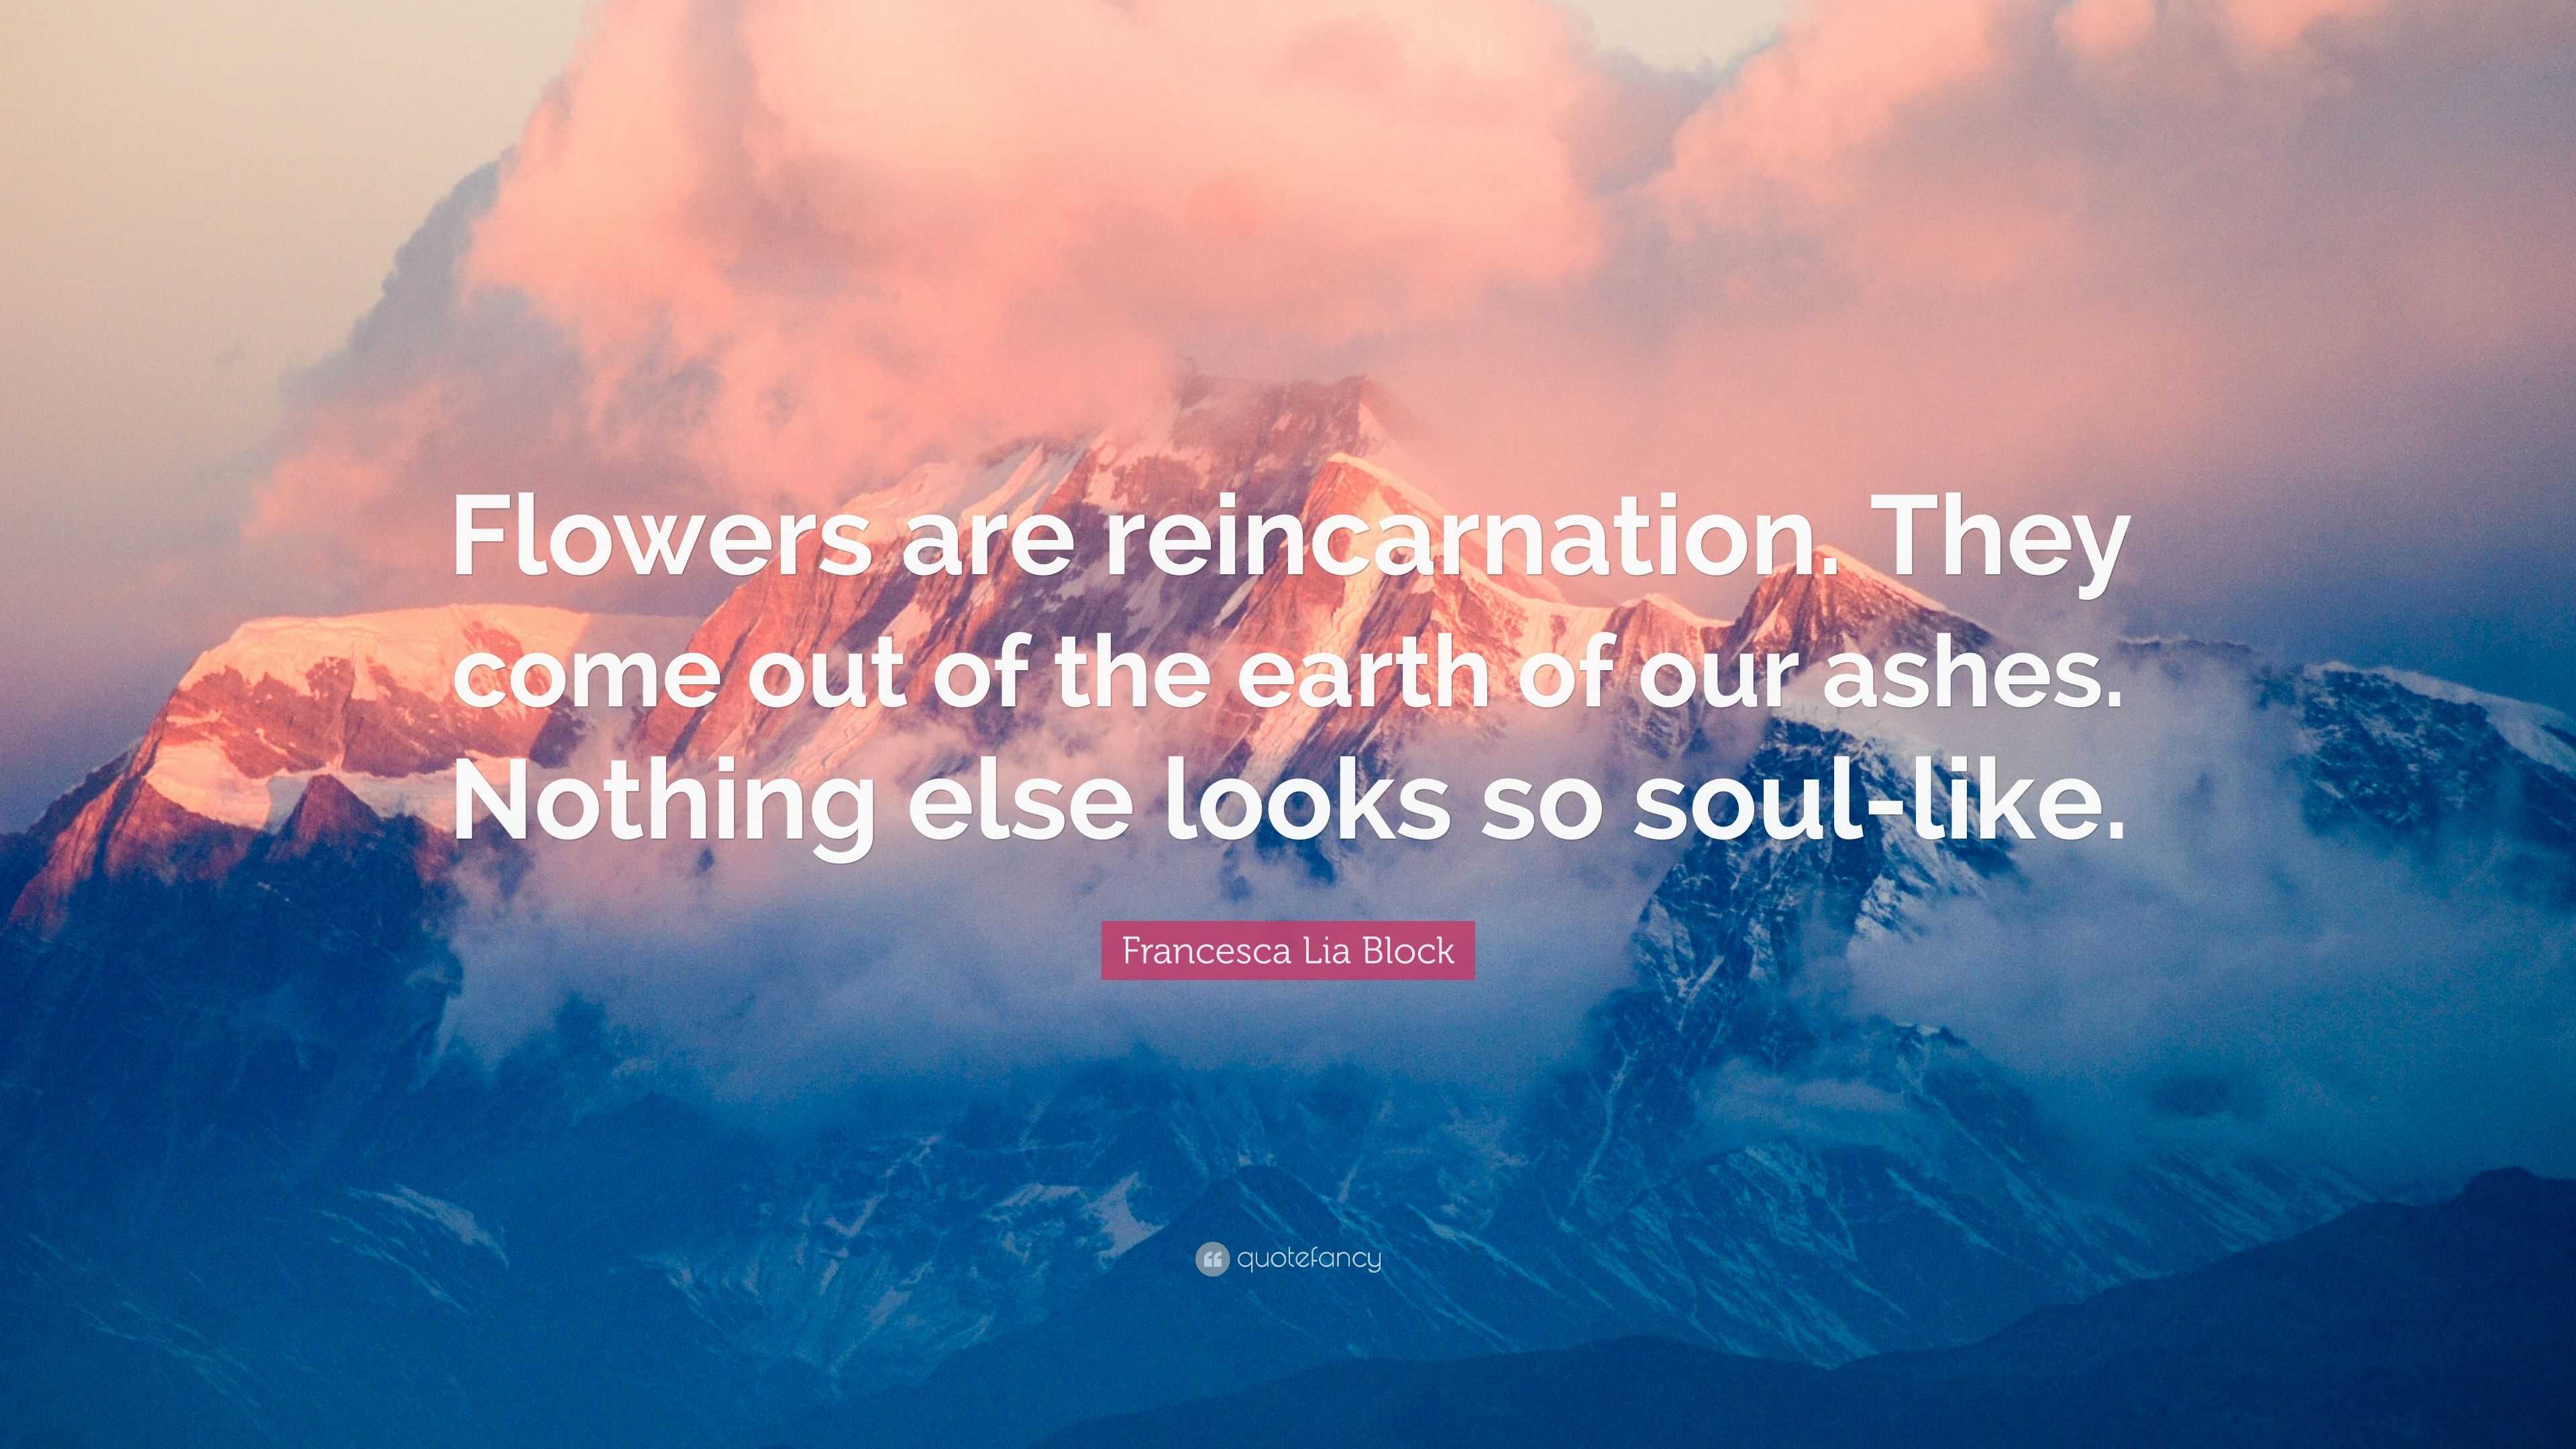 Francesca Lia Block Quote: “Flowers are reincarnation. They come out of ...